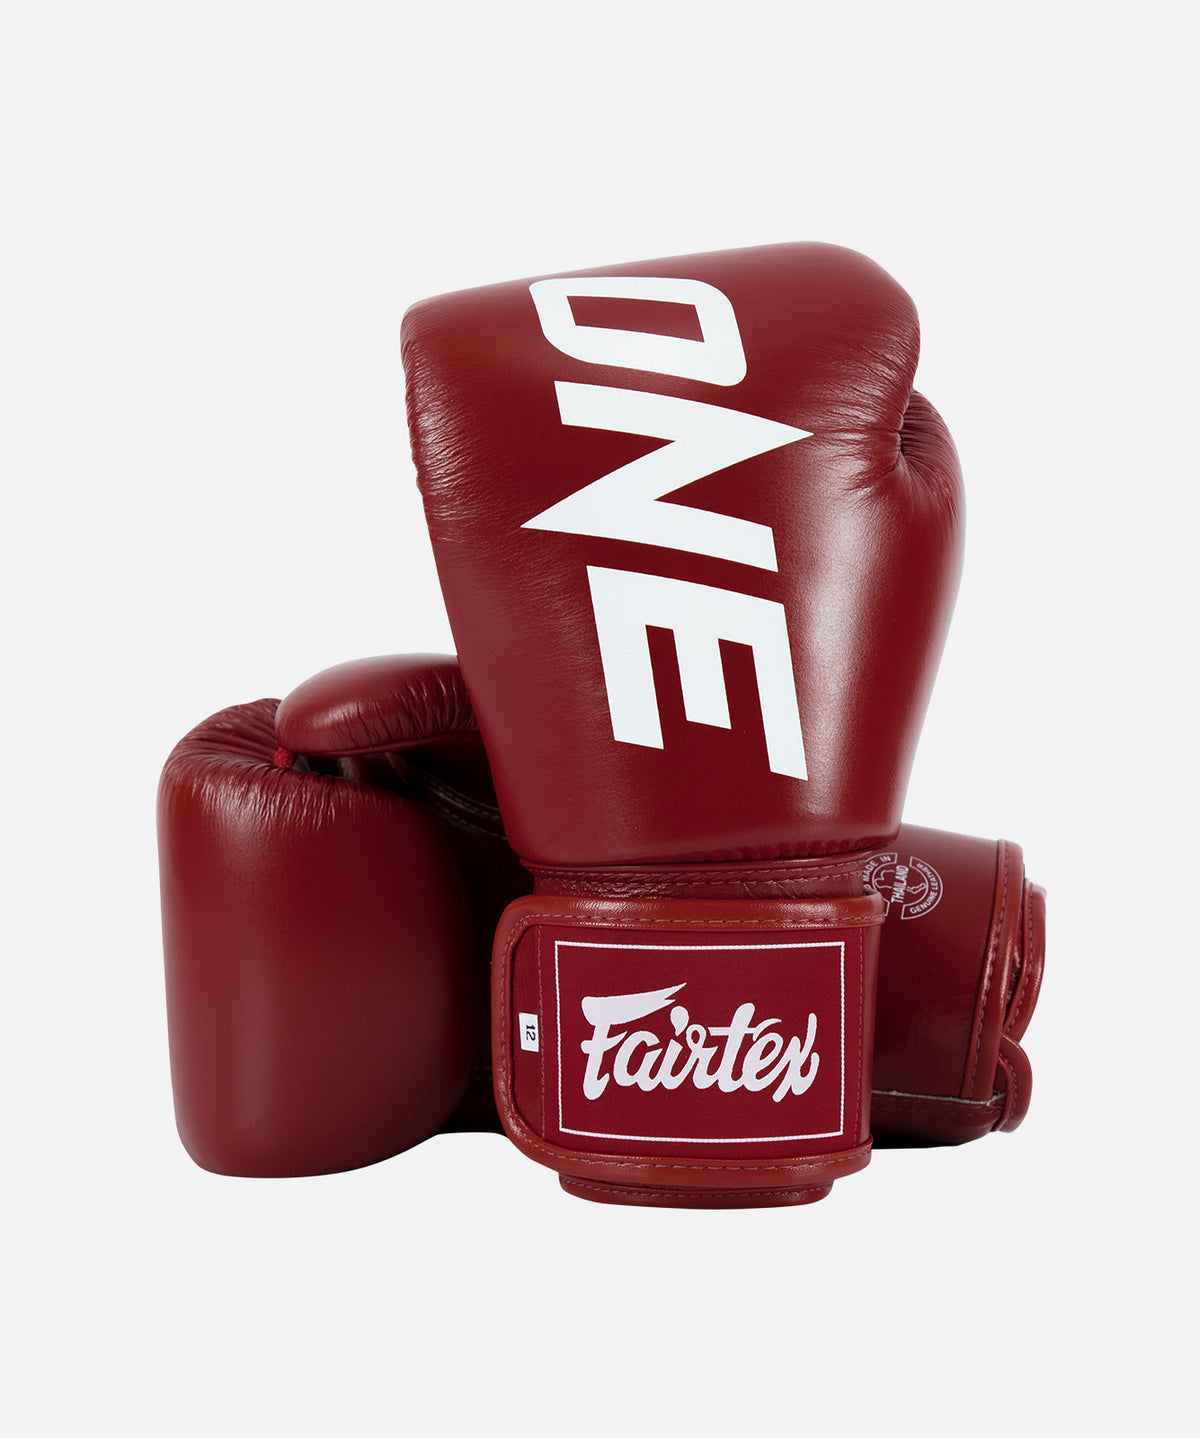 ONE x Fairtex Boxing Gloves (Red) - ONE.SHOP | The Official Online Shop of ONE Championship